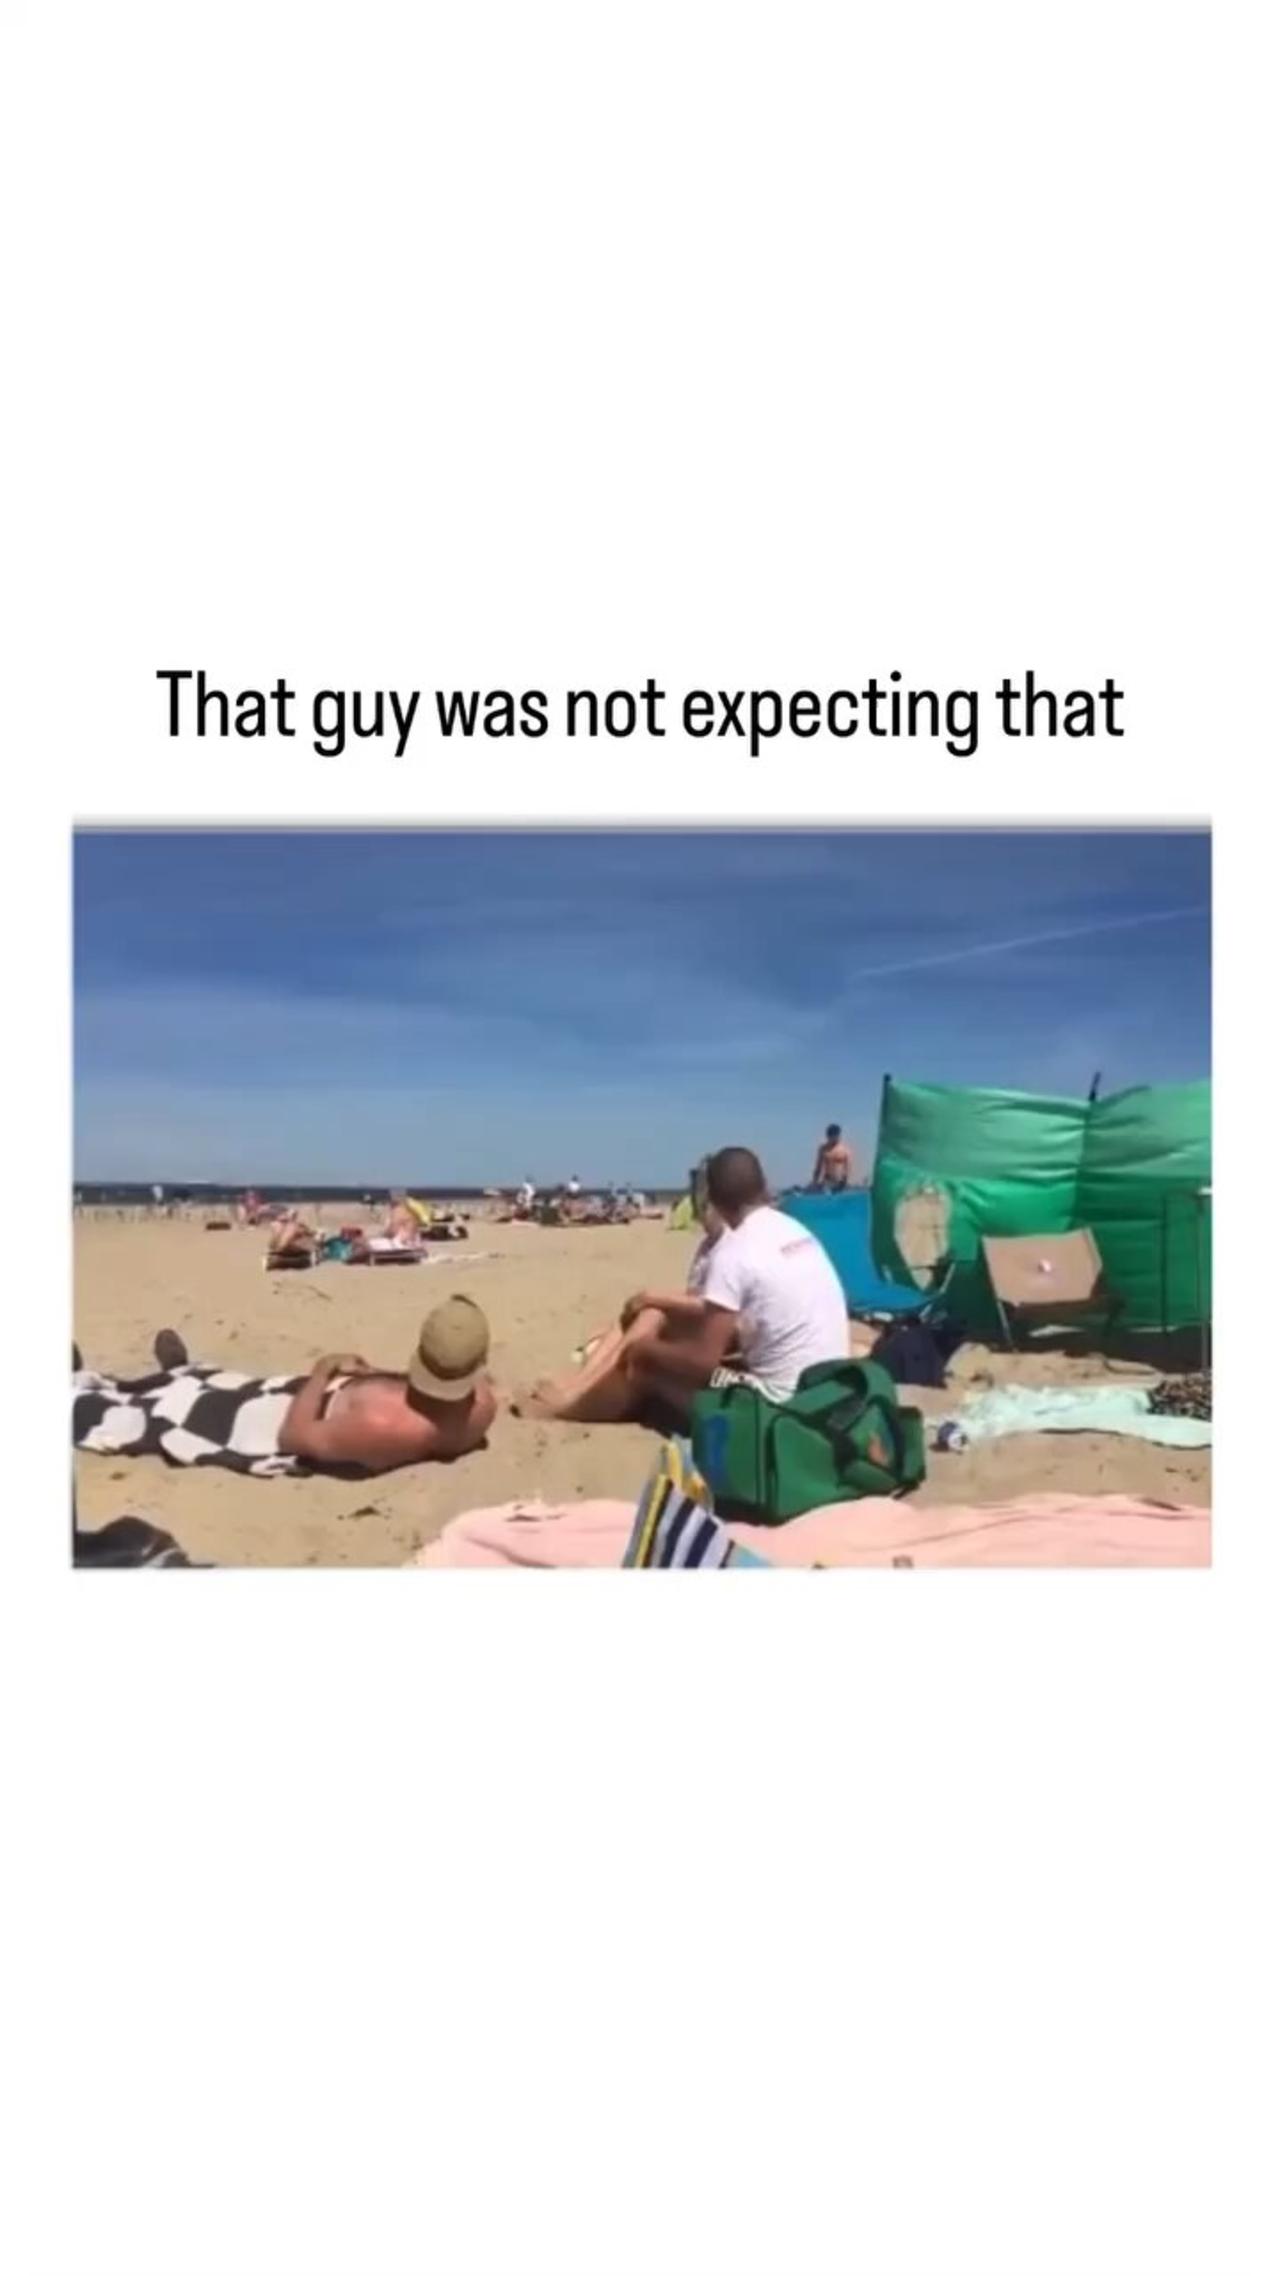 That guy was not expecting that at all 😂🤣